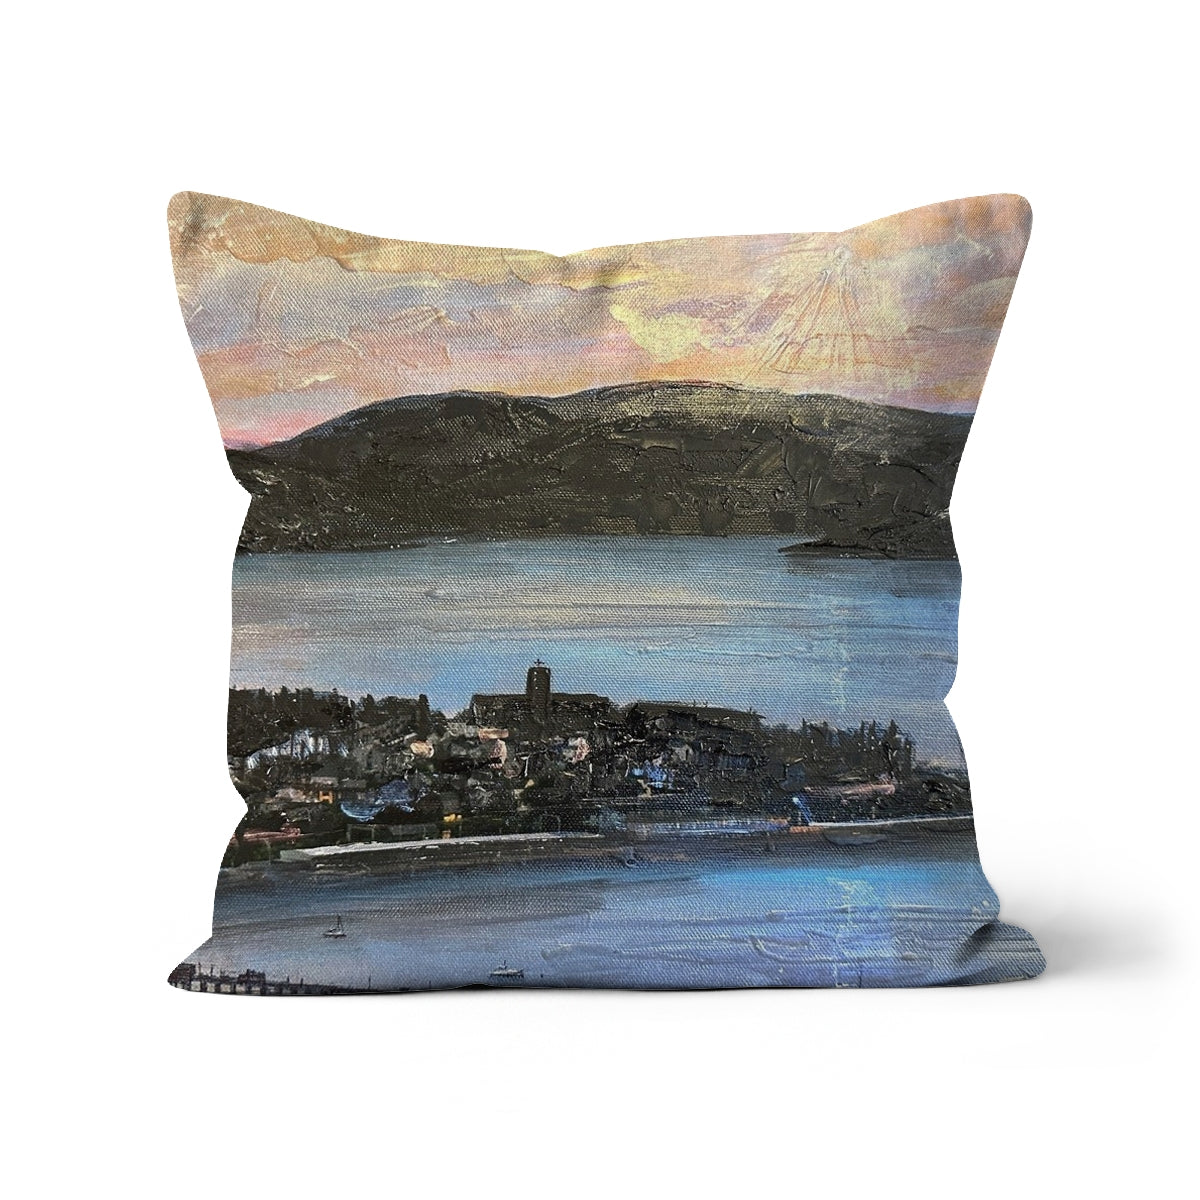 From Lyle Hill Art Gifts Cushion-Cushions-River Clyde Art Gallery-Canvas-12"x12"-Paintings, Prints, Homeware, Art Gifts From Scotland By Scottish Artist Kevin Hunter